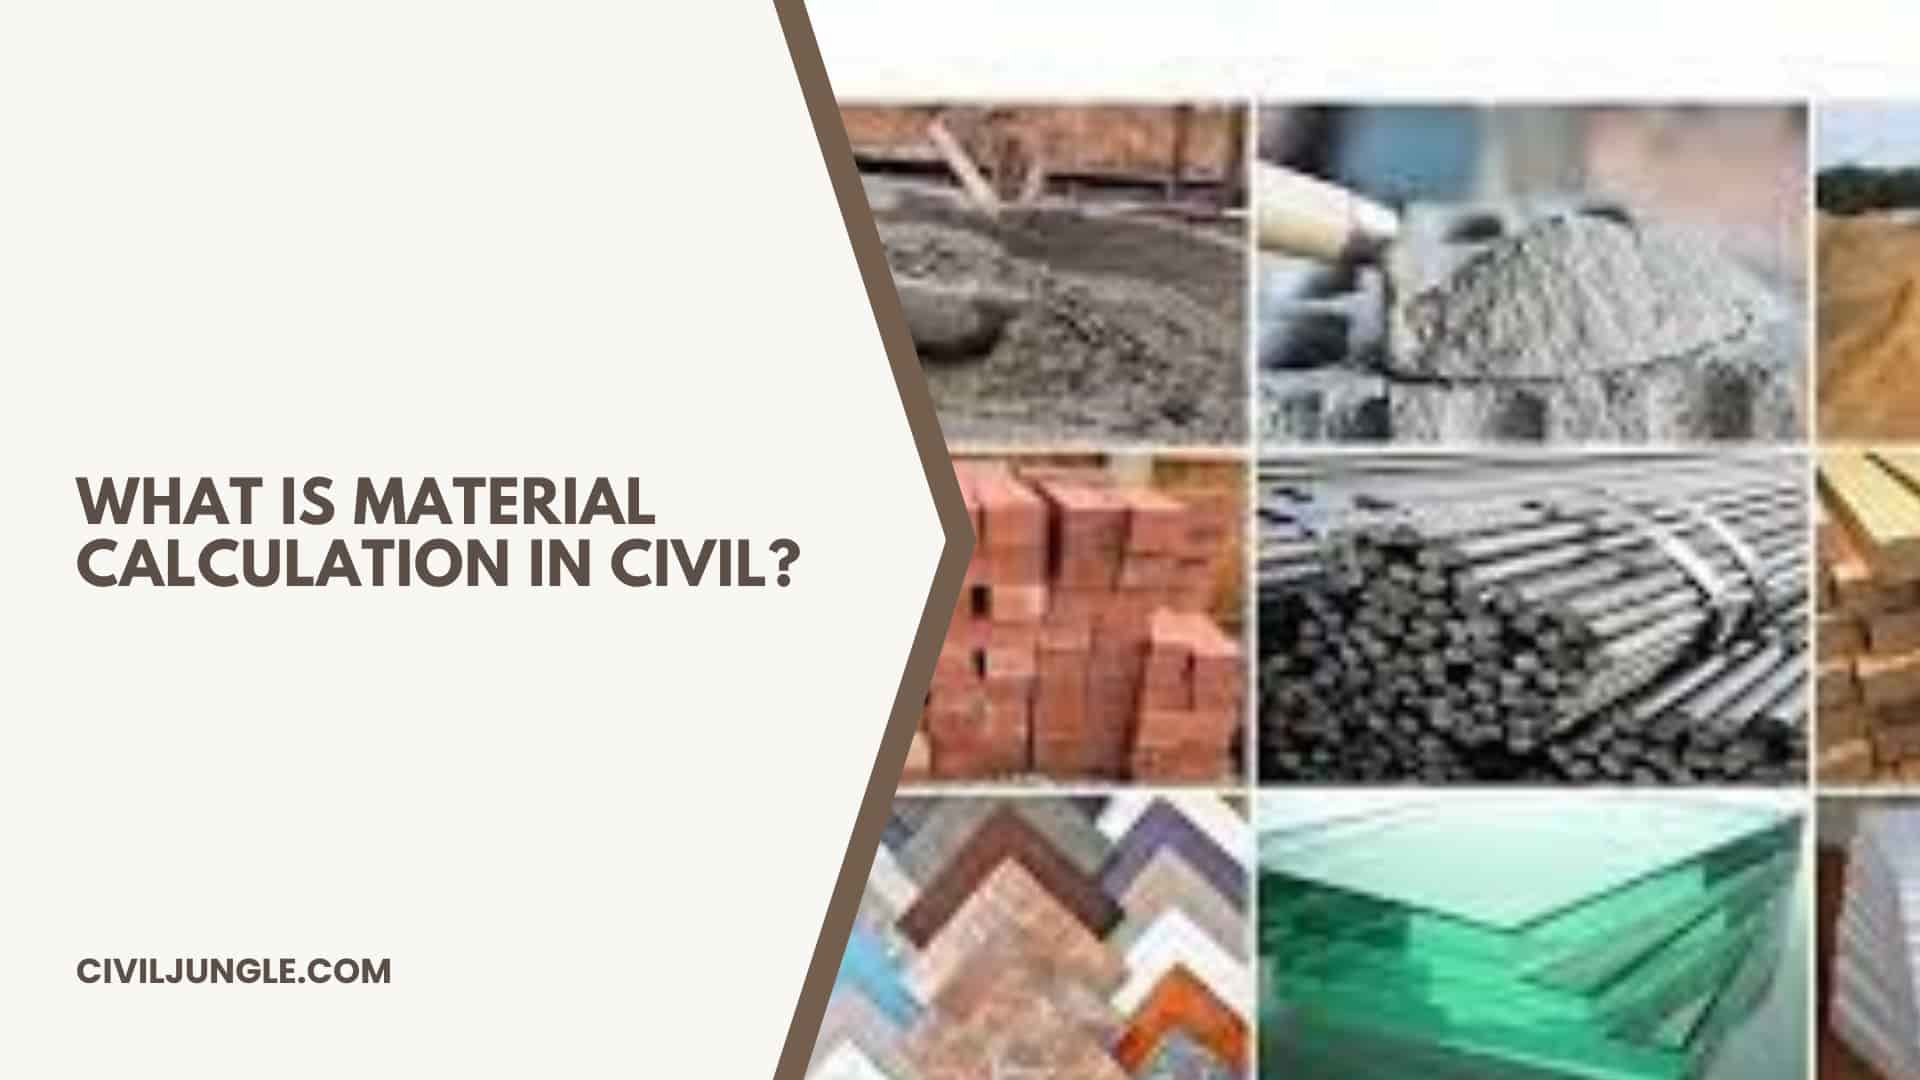 What is Material Calculation In Civil?